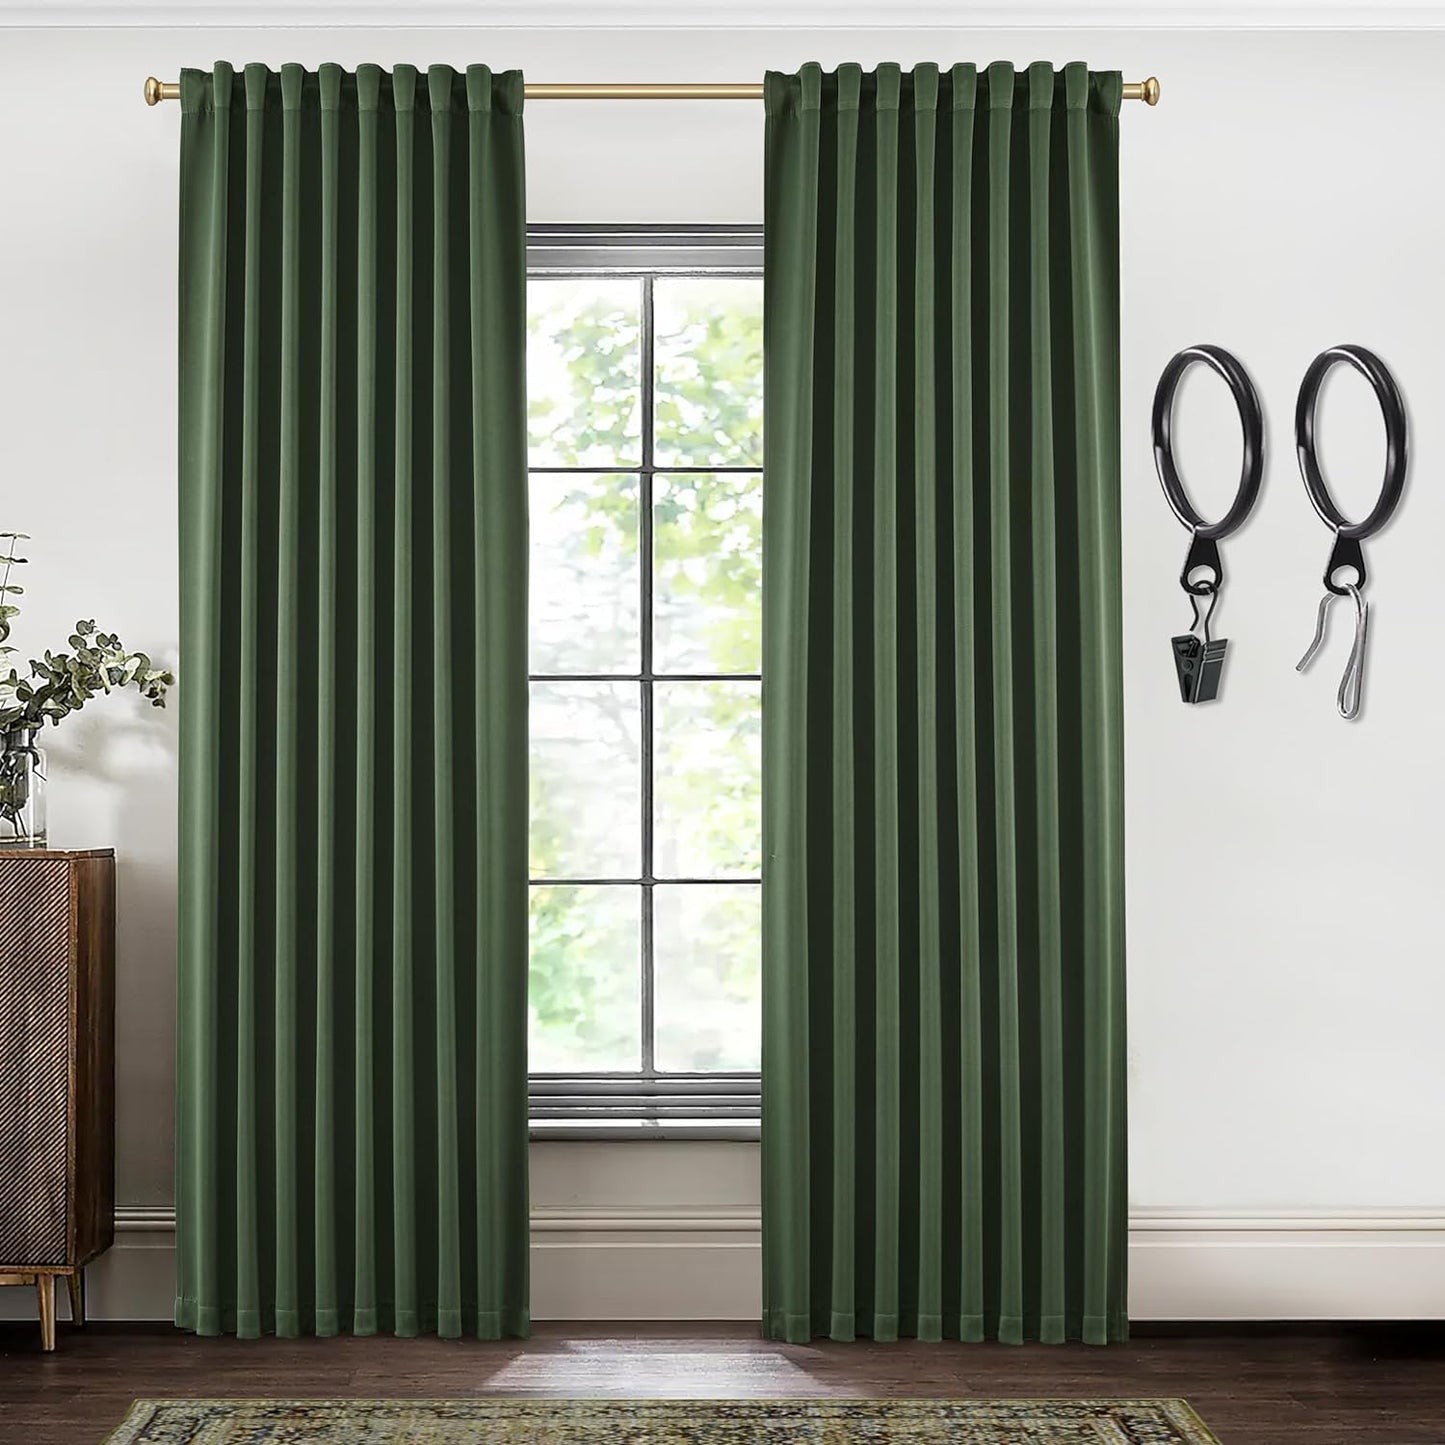 SHINELAND Beige Room Darkening Curtains 105 Inches Long for Living Room Bedroom,Cortinas Para Cuarto Bloqueador De Luz,Thermal Insulated Back Tab Pleat Blackout Curtains for Sunroom Patio Door Indoor  SHINELAND Olive Green 2X(52"Wx84"L) 